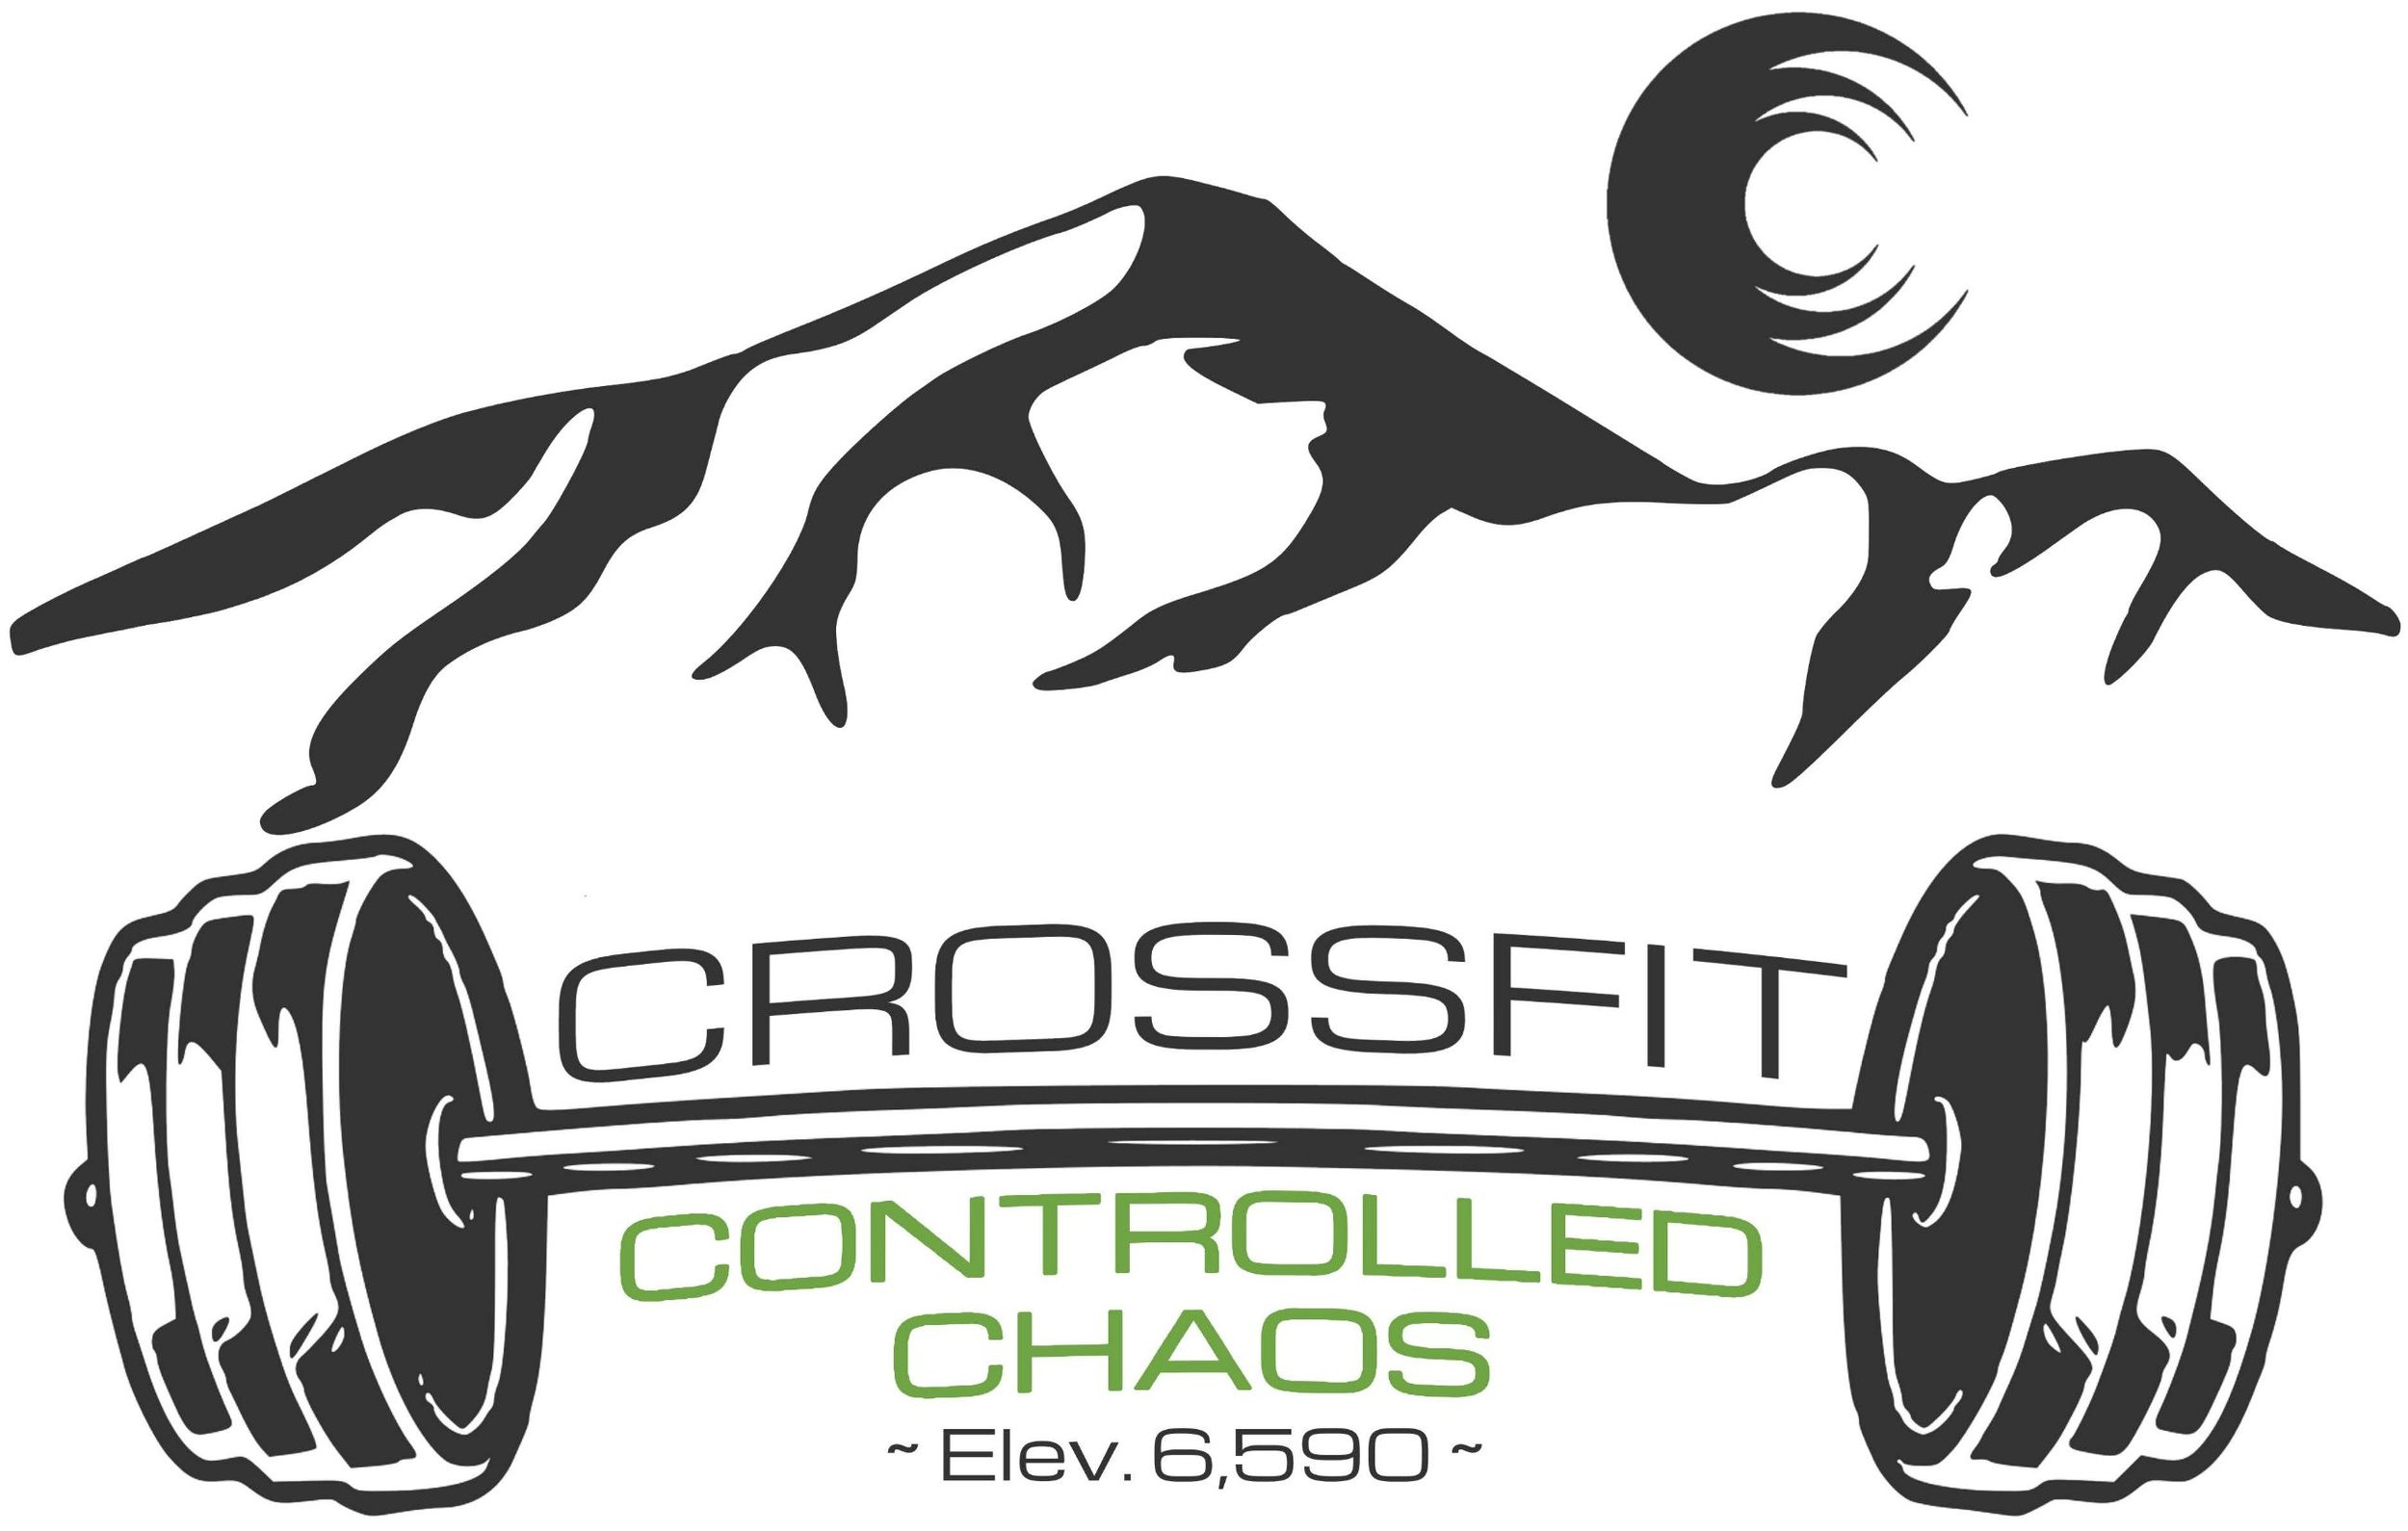 CrossFit Controlled Chaos